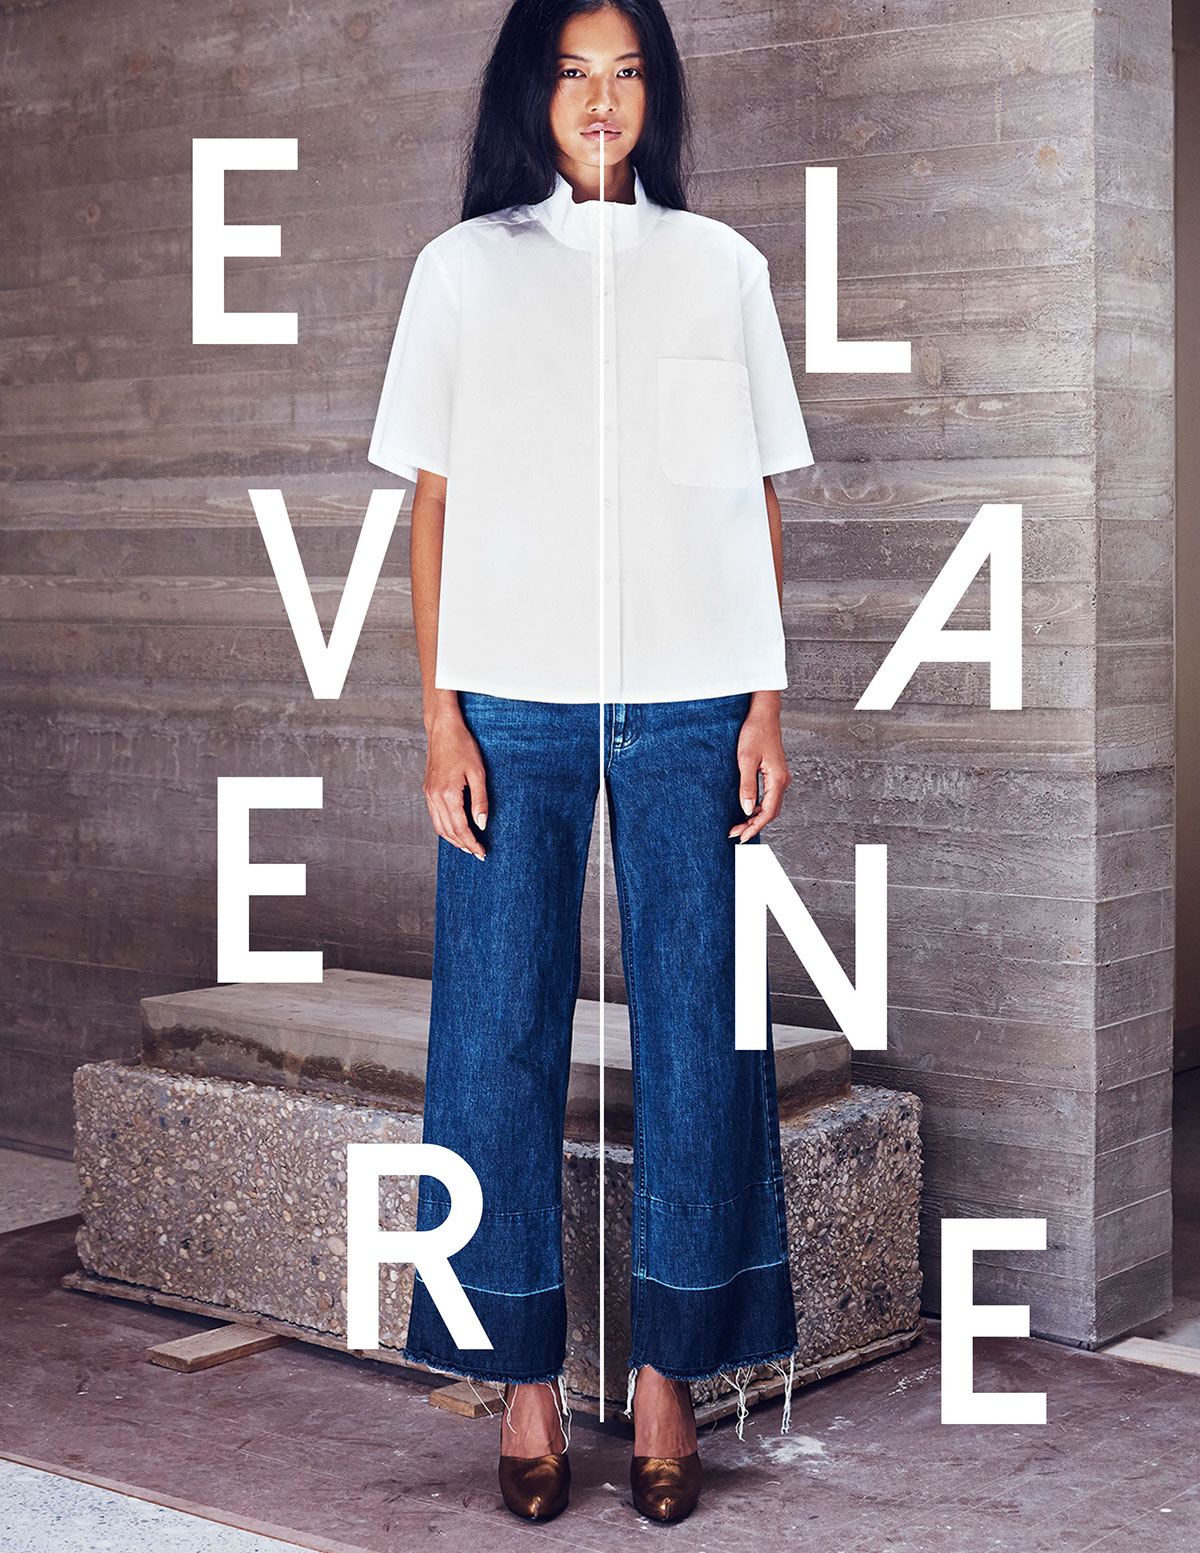 product development everlane Ecommerce Denim jeans upcycling RECYCLED plastic Sustainability Transparency